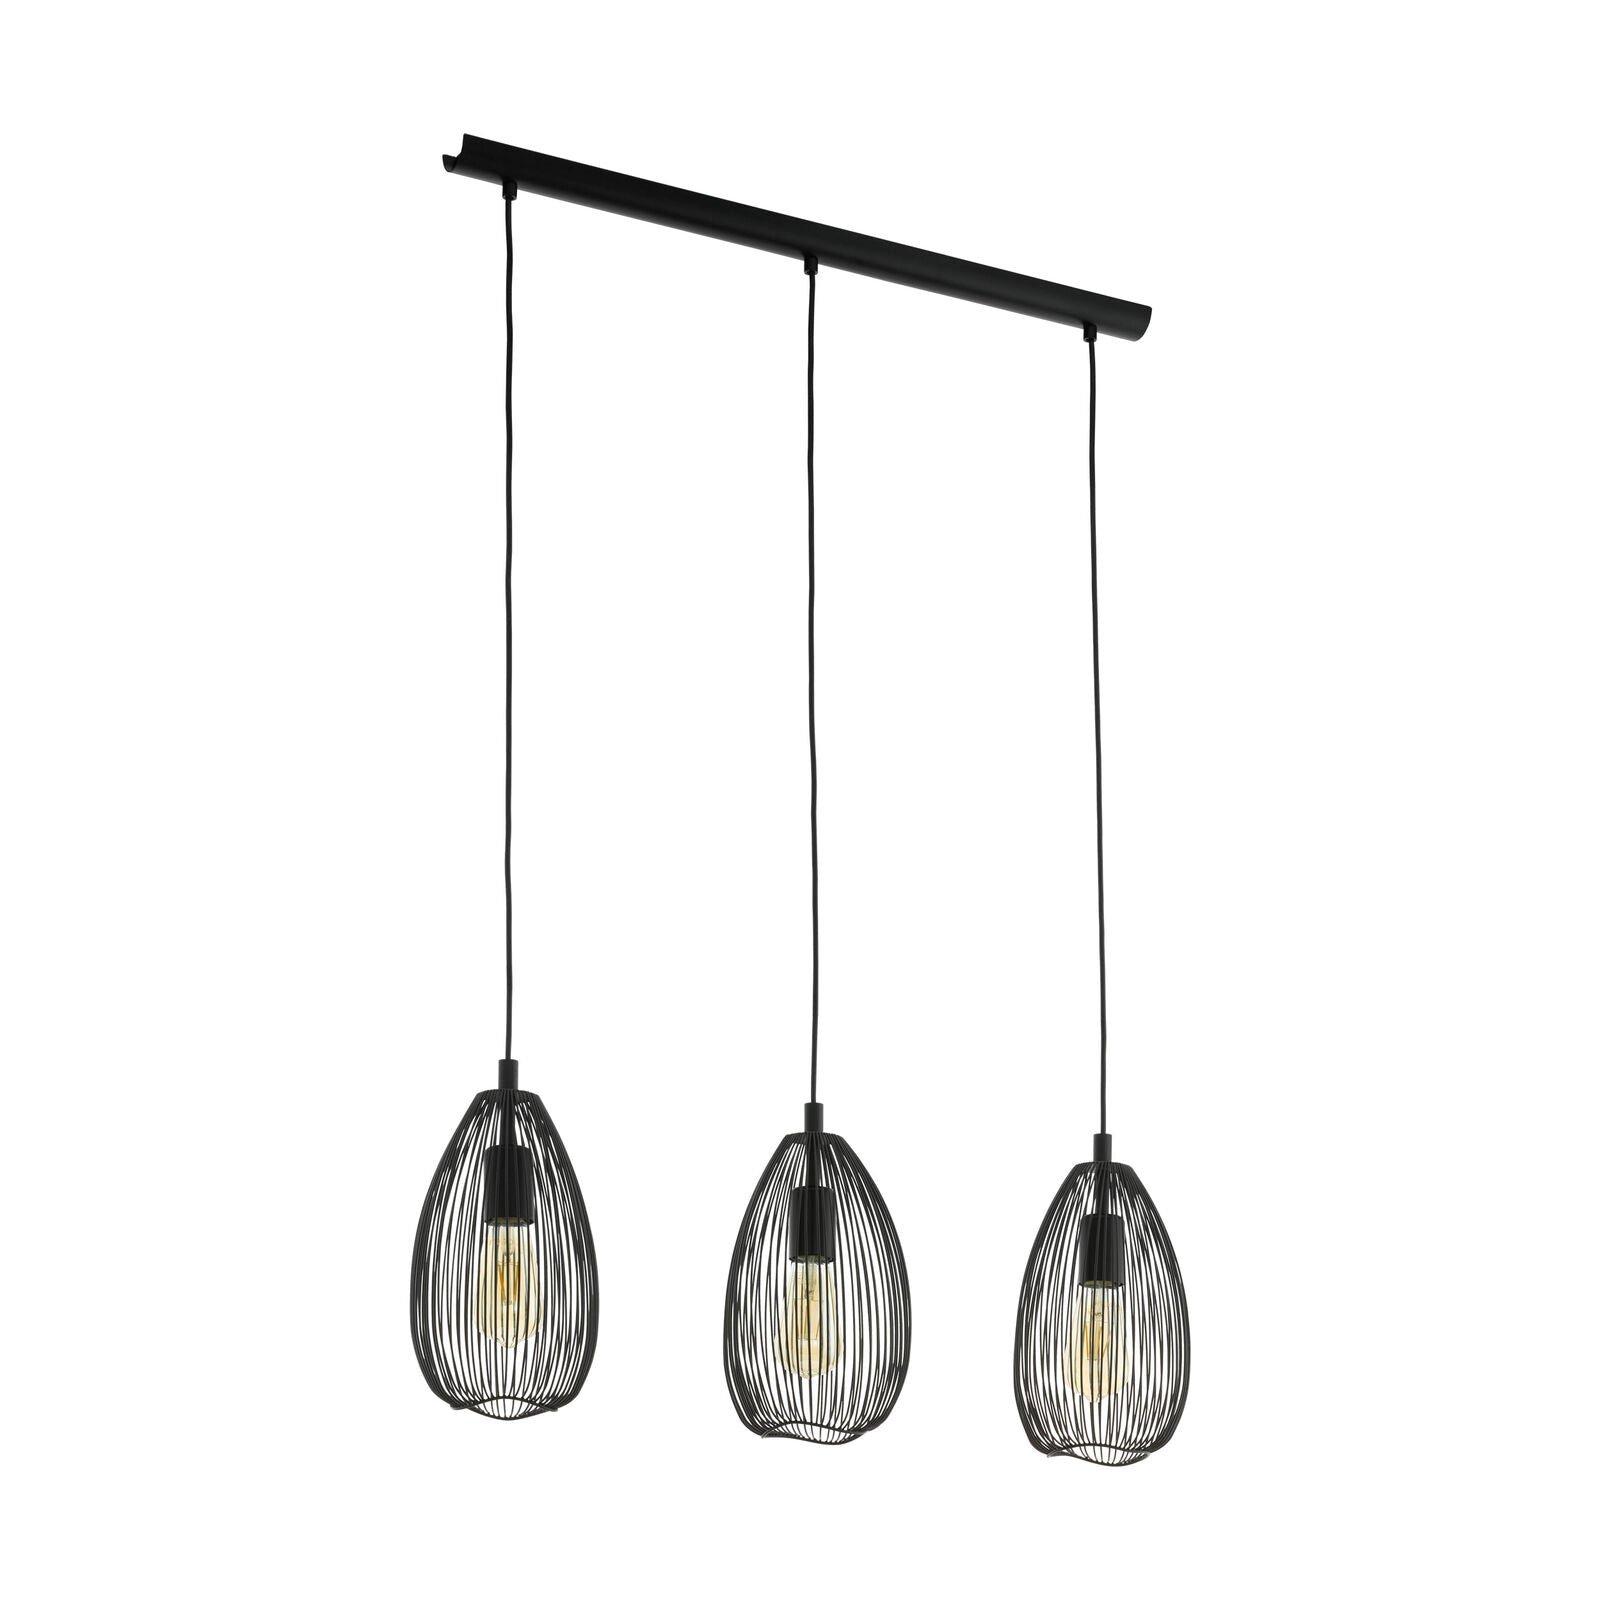 Hanging Ceiling Pendant Light Black Wire Shade 3x 60W E27 Kitchen Island Lamp